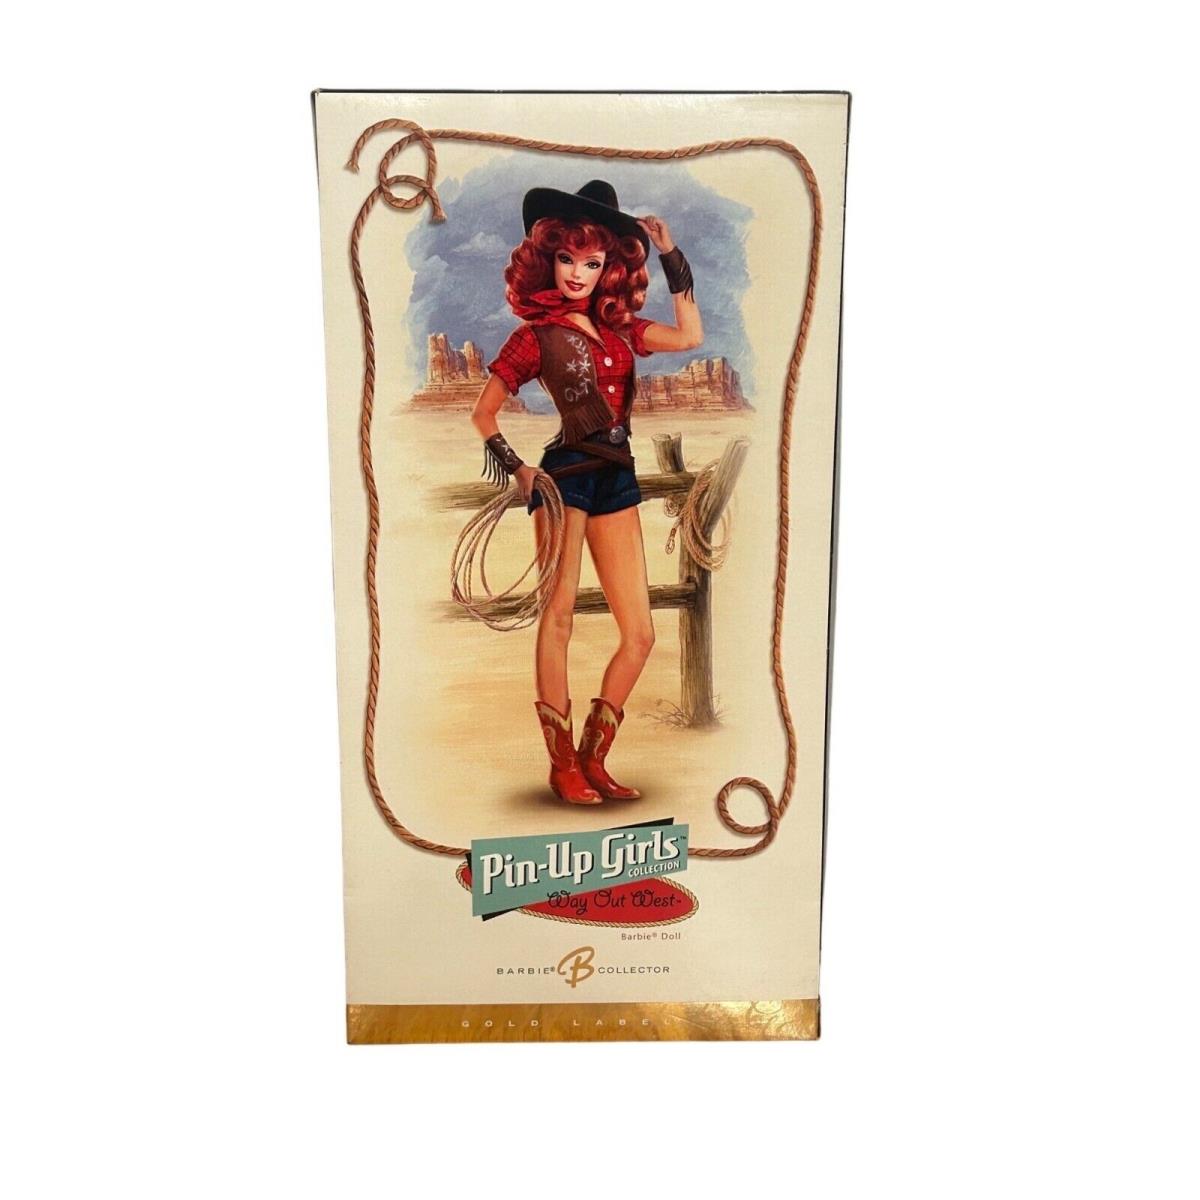 Barbie Gold Label Pin-up Girls Collection Way Out West Barbie Doll J0934 Mattel